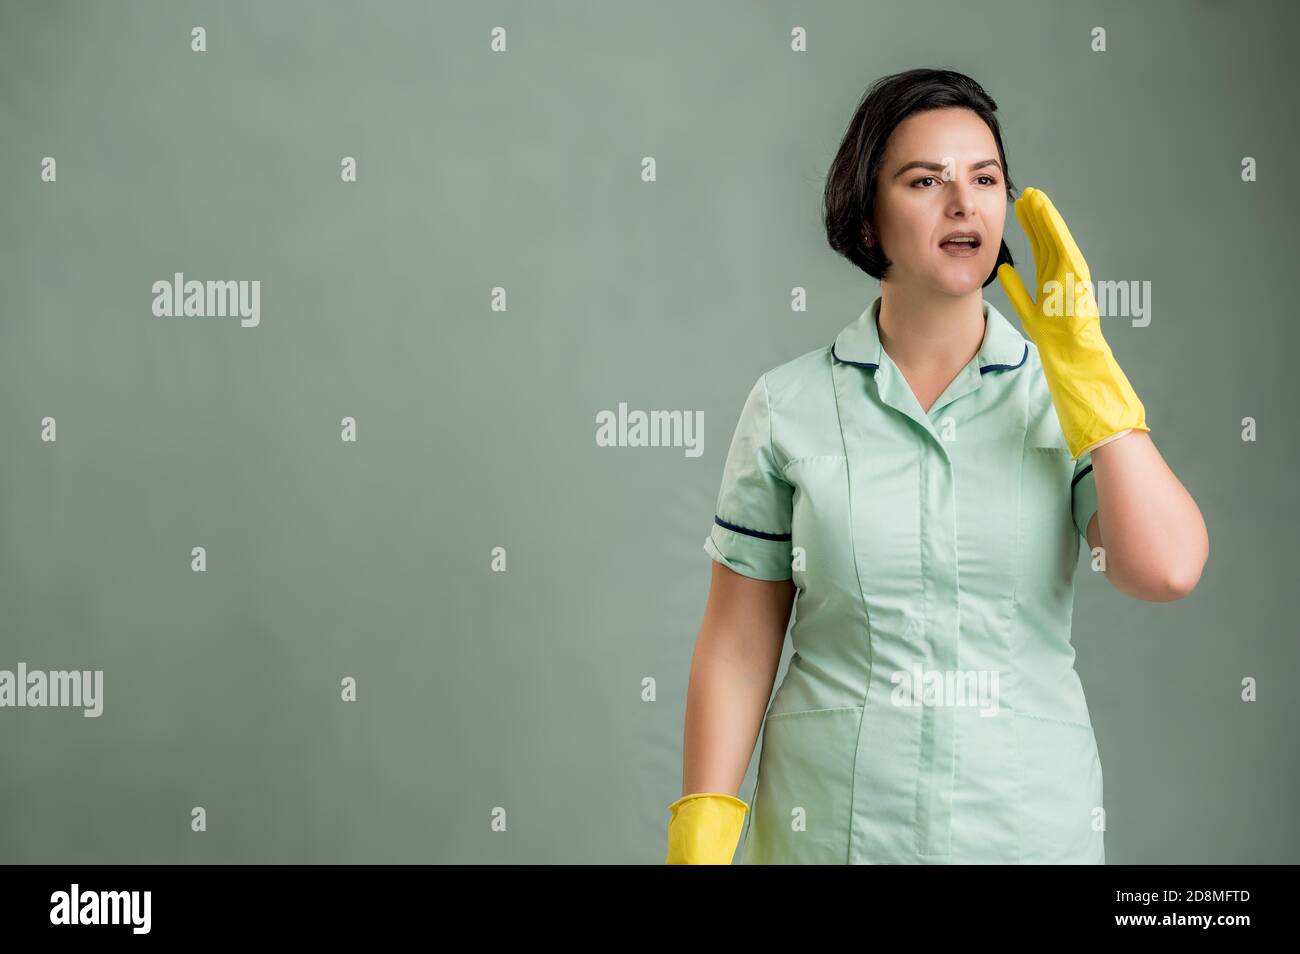 Young cleaning woman wearing a green shirt and yellow gloves, shouting with her hand to her mouth isolated on green background Stock Photo